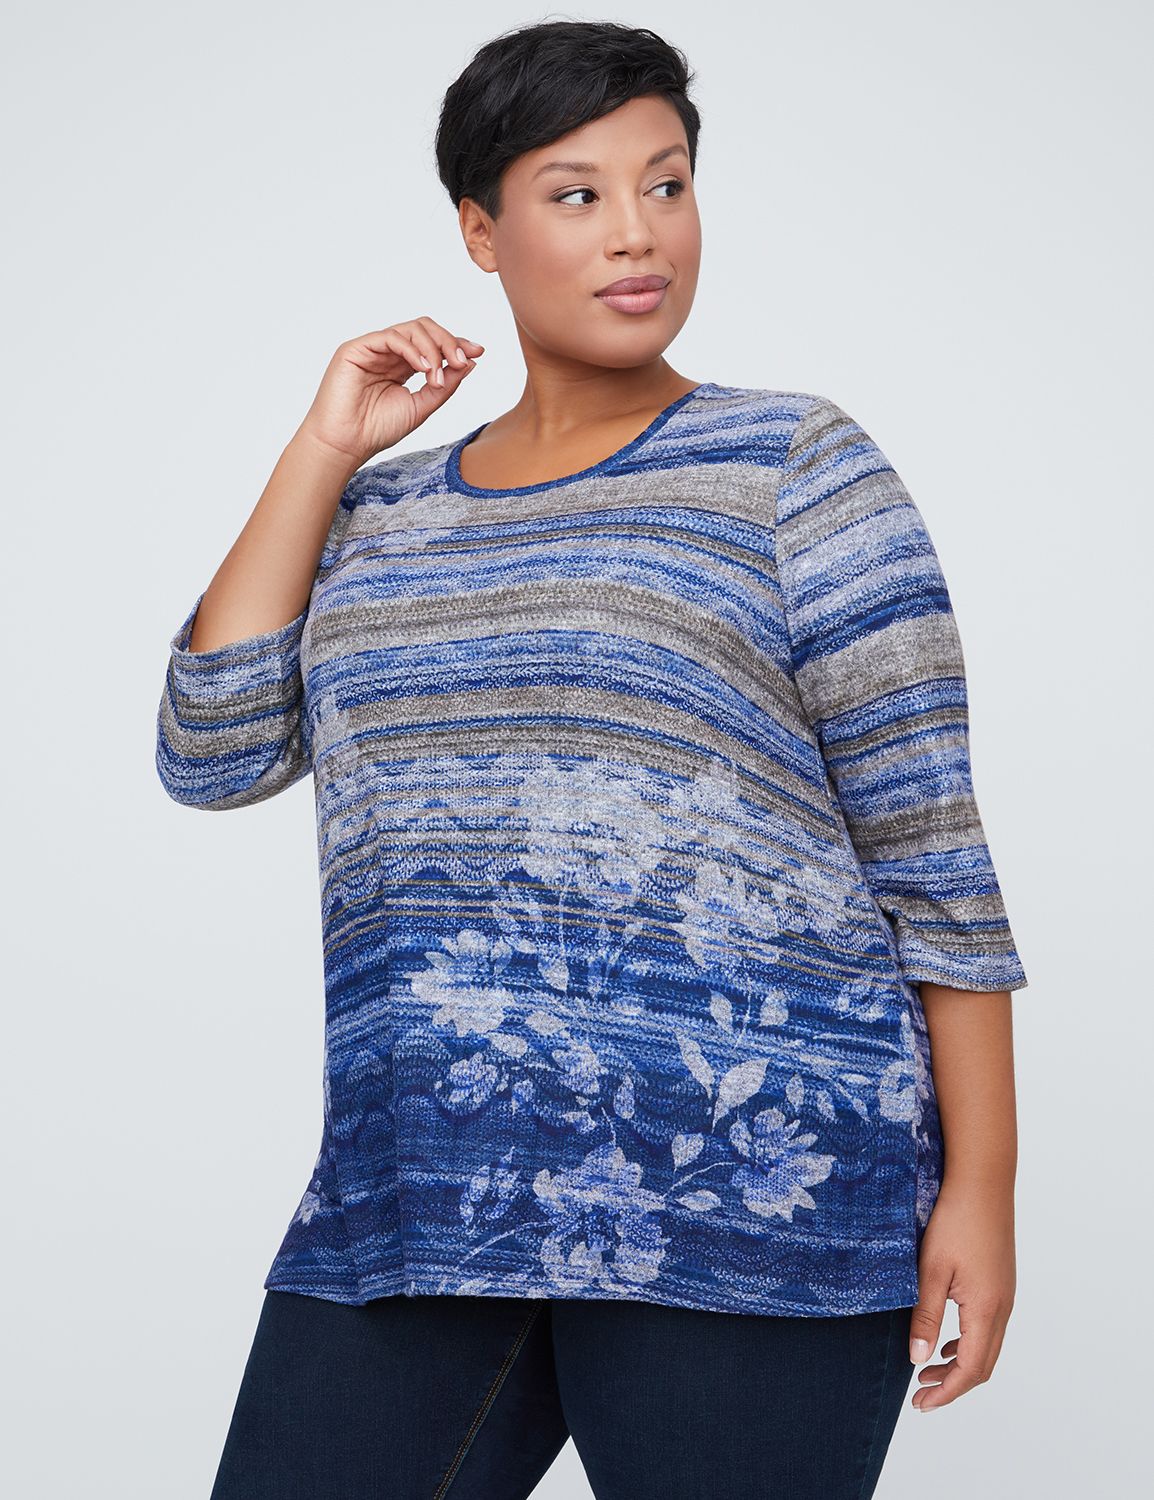 Women's Plus Size Tops & Blouses | Catherines